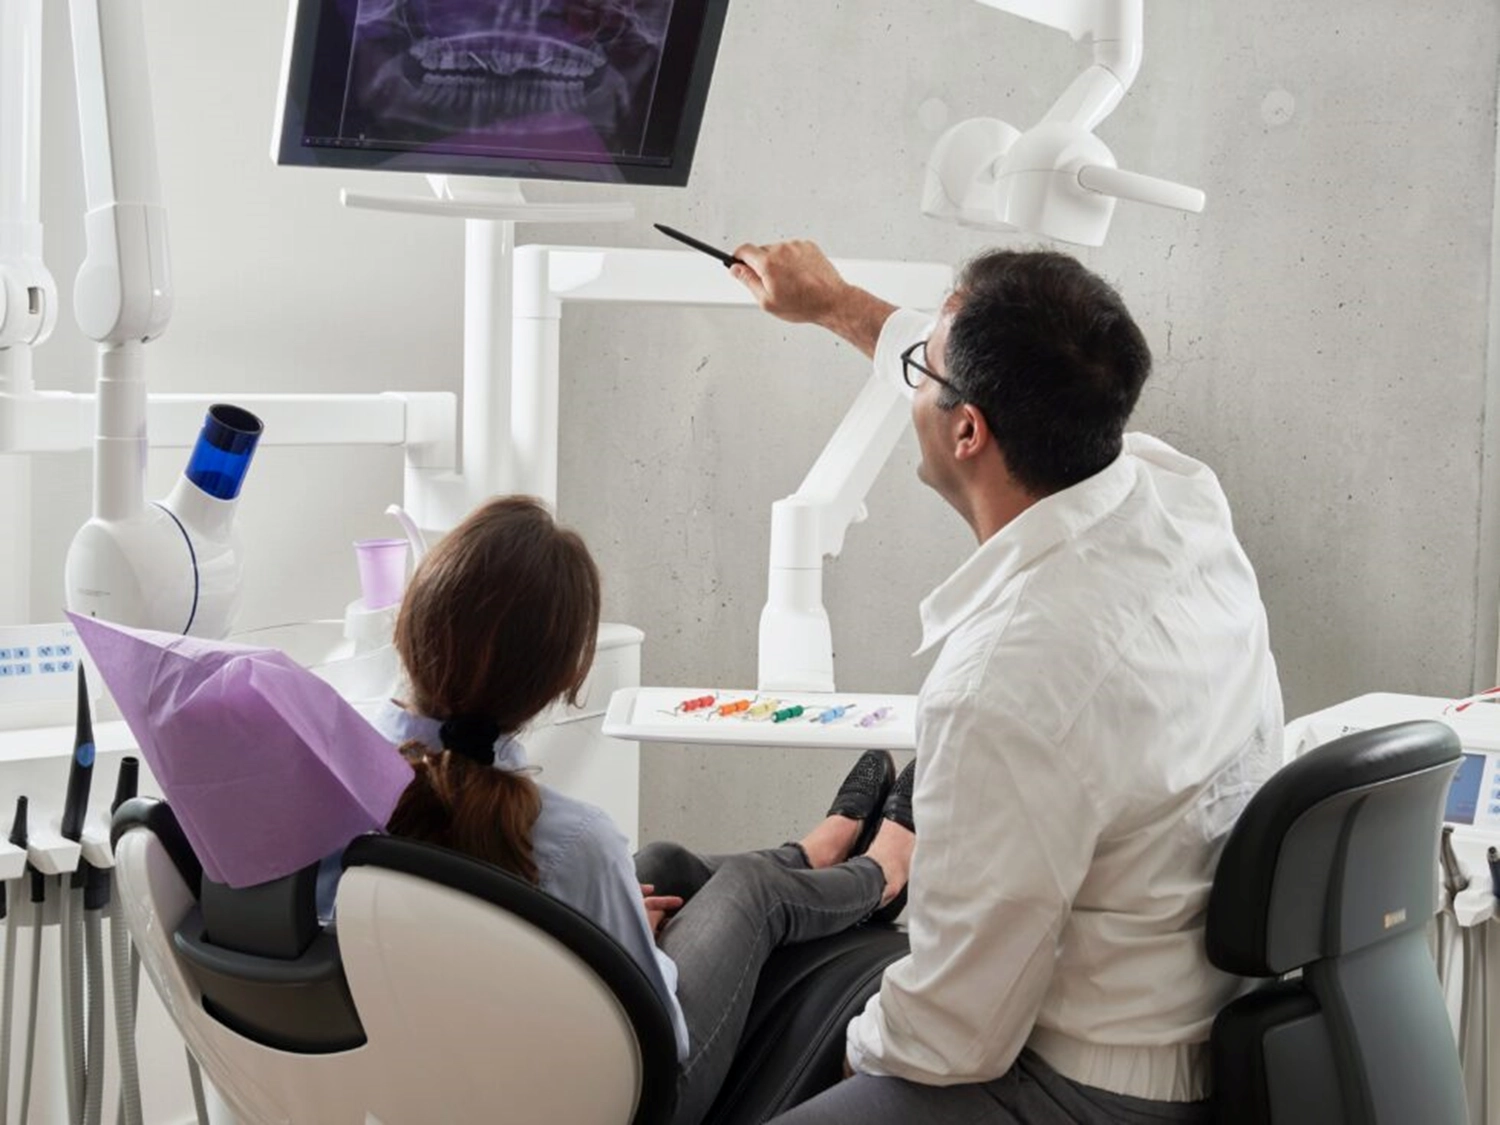 A Dentist and woman reviewing an x-ray in an exam room.